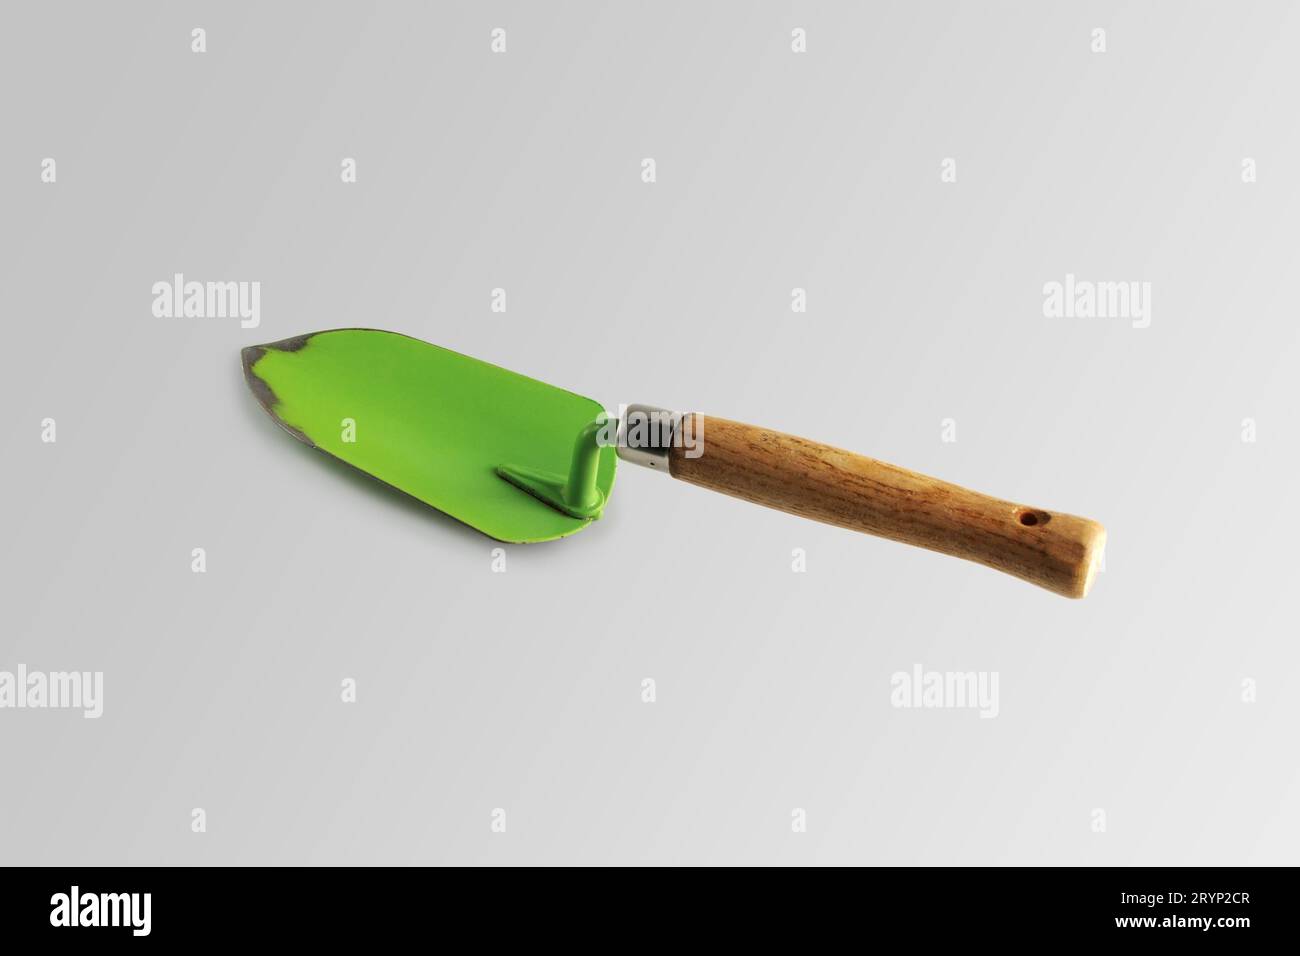 Garden shovel green. Close-up. Isolated on a gray background. Stock Photo